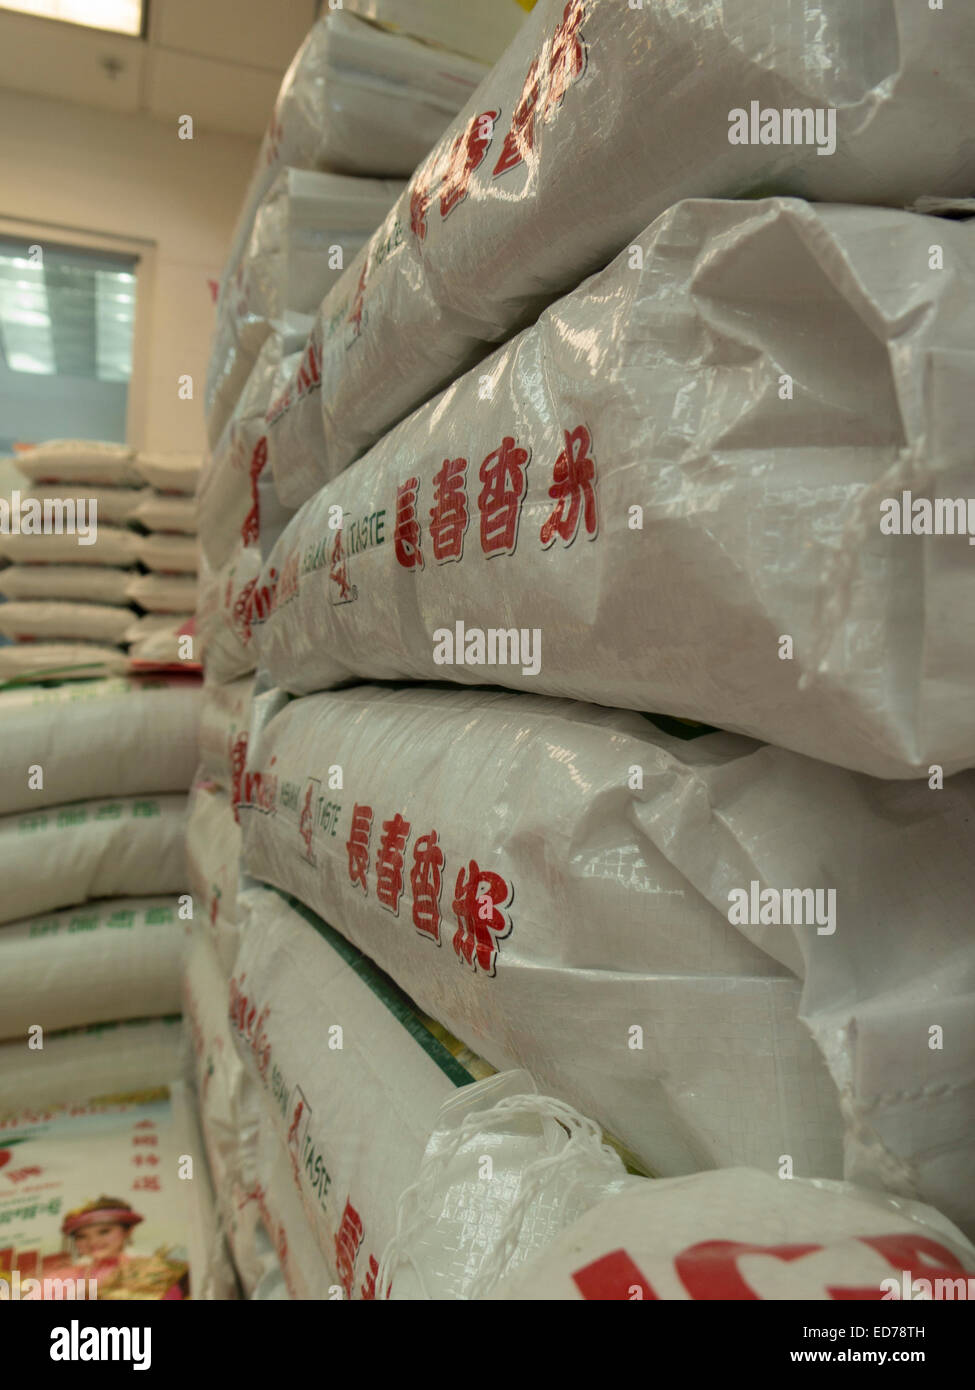 Bags of rice are stored in piles at an Asian market in Albany, New York. Stock Photo